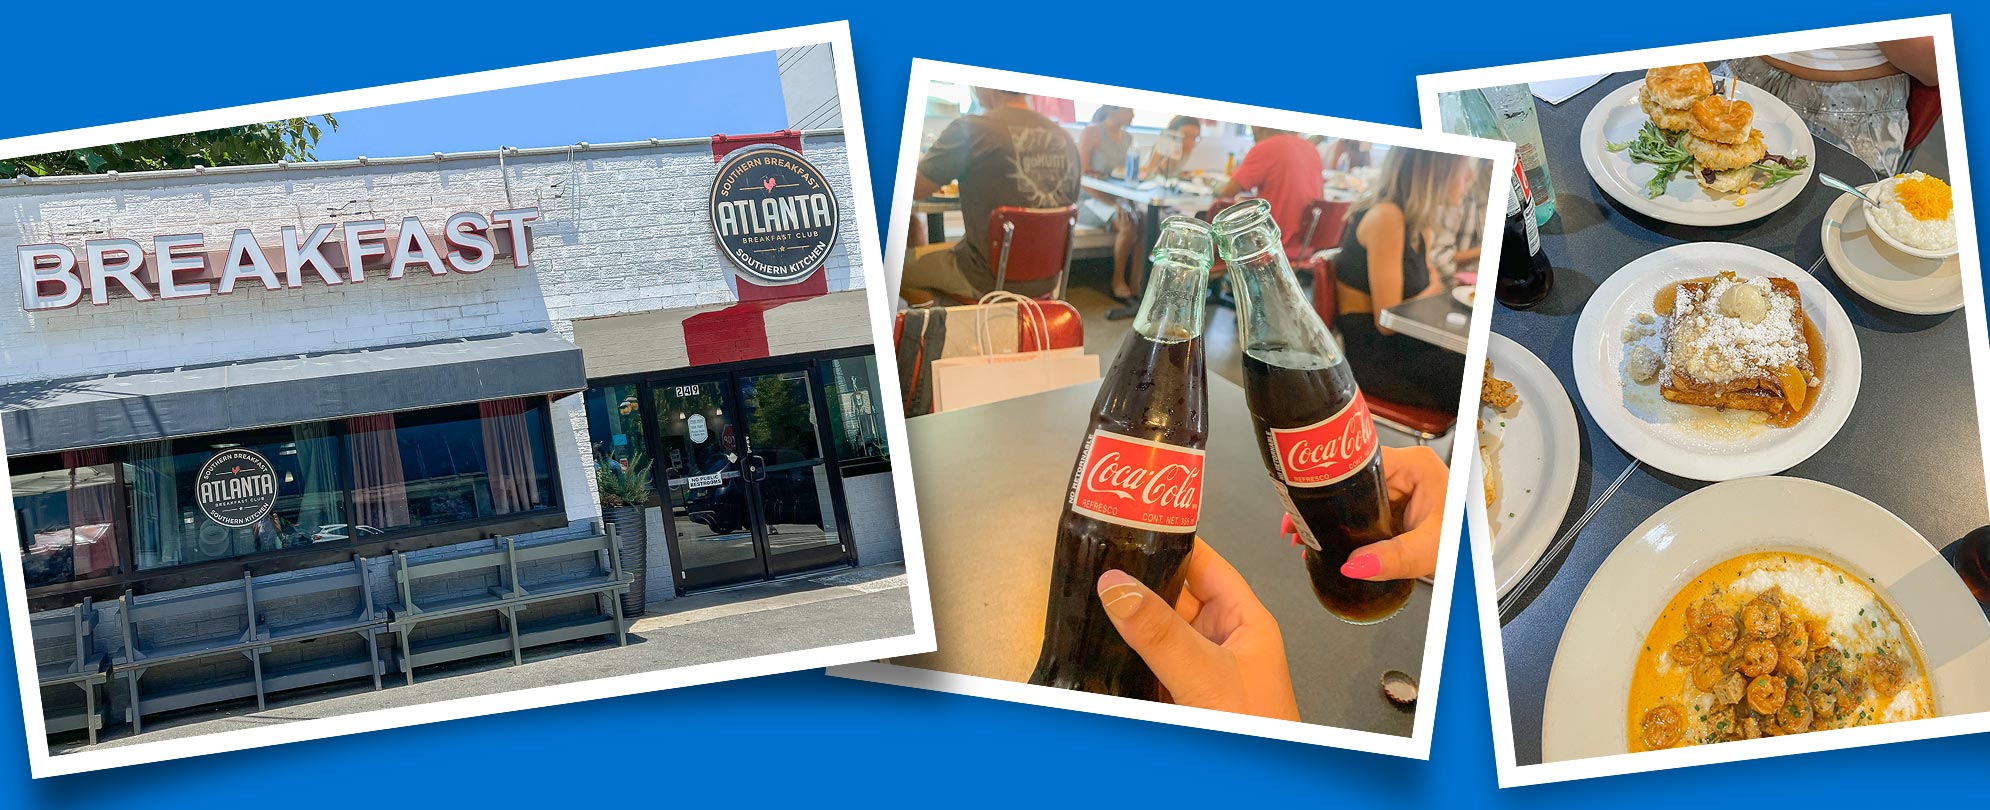 Three snapshots on a blue background showing the exterior of Atlanta Breakfast Club building, two hands clinking together old-fashioned Coca-Cola bottles, and a gray table with plates of breakfast meals.